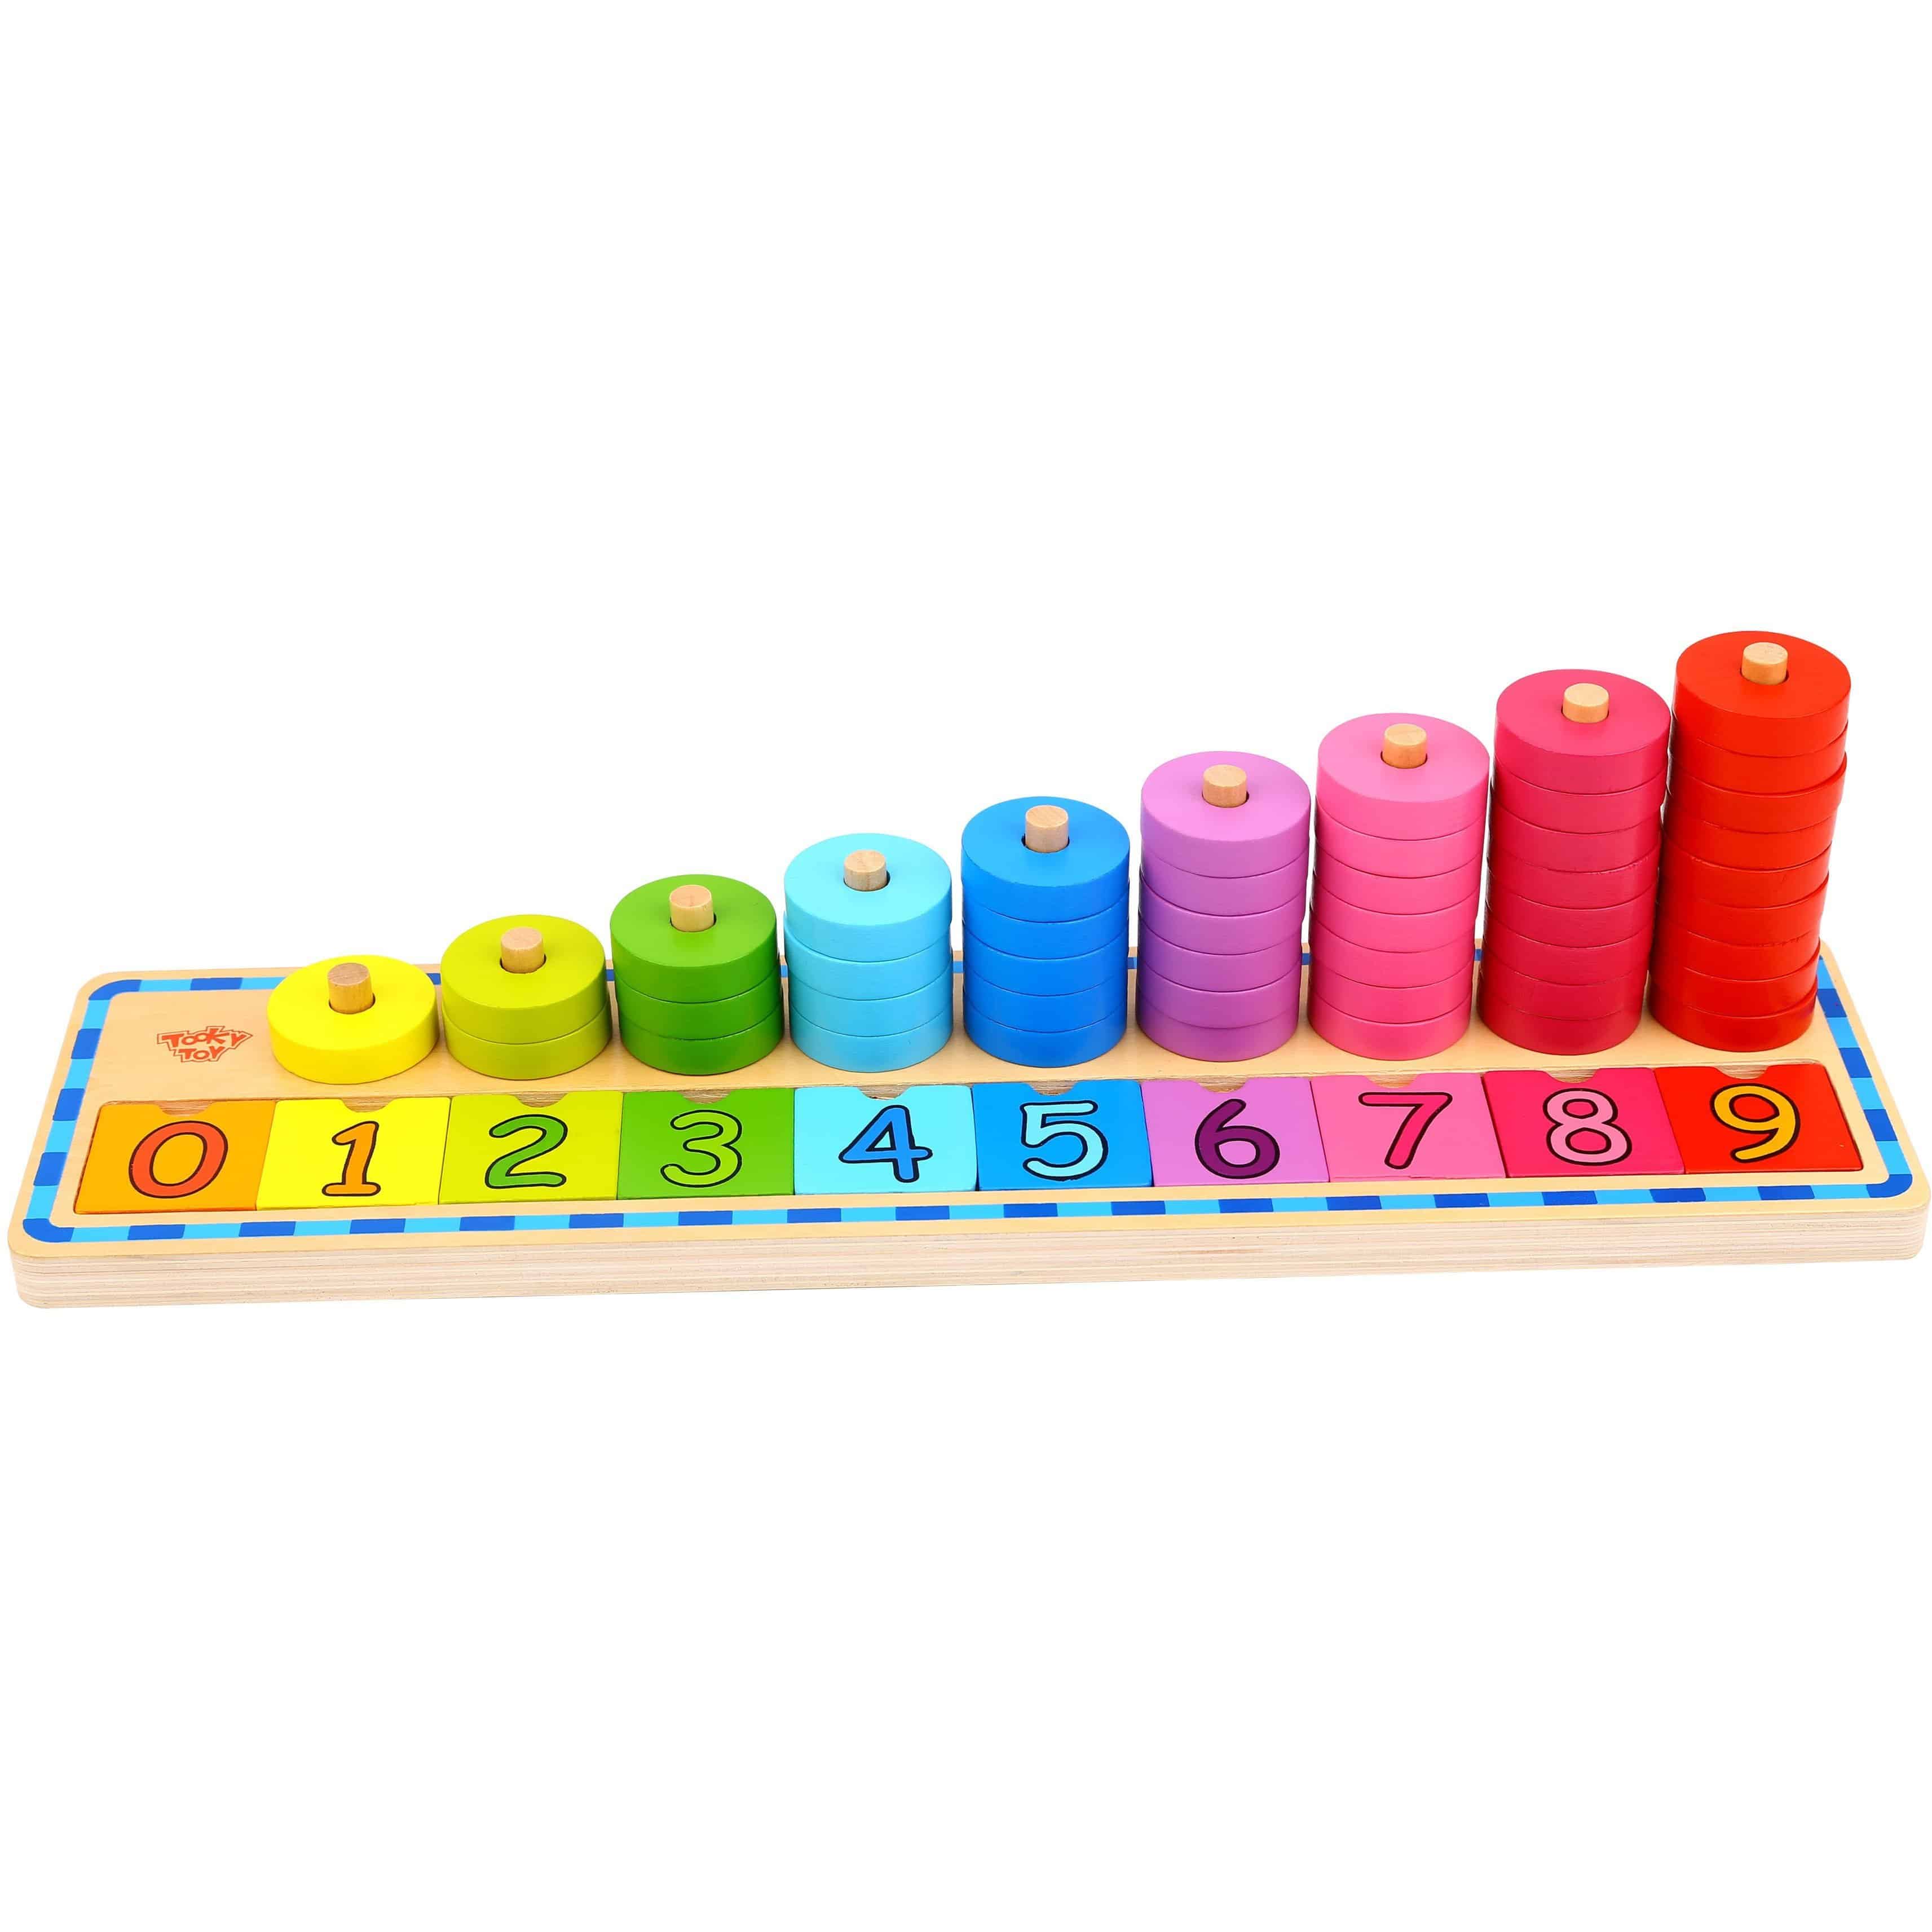 Counting Stacker